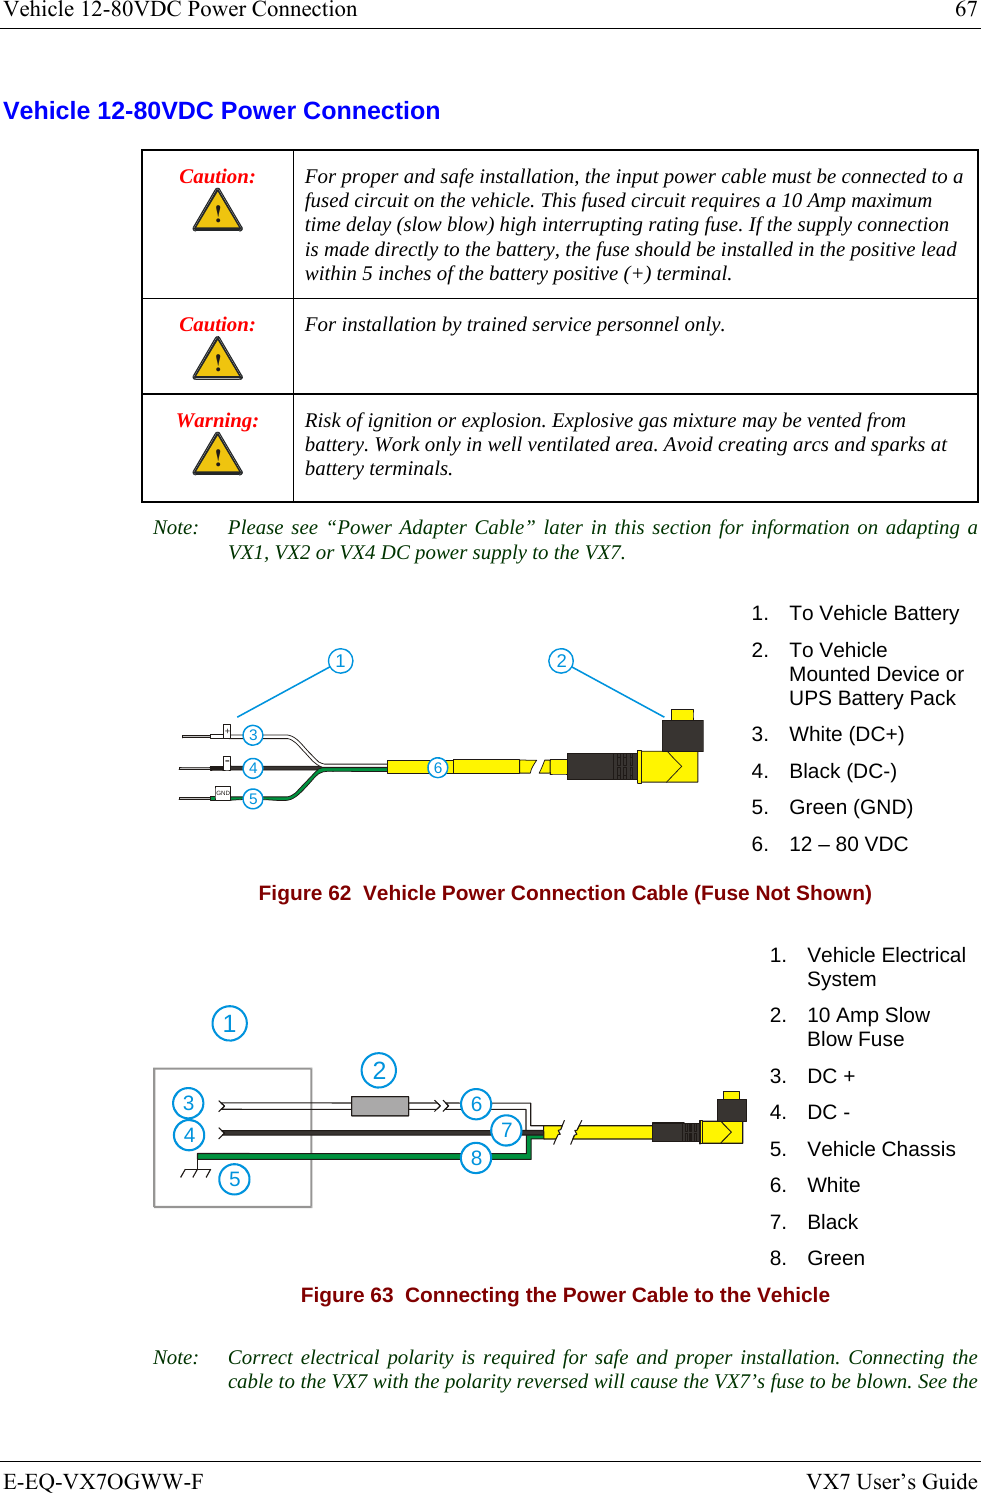 Vehicle 12-80VDC Power Connection  67 E-EQ-VX7OGWW-F  VX7 User’s Guide Vehicle 12-80VDC Power Connection Caution: ! For proper and safe installation, the input power cable must be connected to a fused circuit on the vehicle. This fused circuit requires a 10 Amp maximum time delay (slow blow) high interrupting rating fuse. If the supply connection is made directly to the battery, the fuse should be installed in the positive lead within 5 inches of the battery positive (+) terminal. Caution: ! For installation by trained service personnel only. Warning: ! Risk of ignition or explosion. Explosive gas mixture may be vented from battery. Work only in well ventilated area. Avoid creating arcs and sparks at battery terminals. Note:  Please see “Power Adapter Cable” later in this section for information on adapting a VX1, VX2 or VX4 DC power supply to the VX7. GND+-34561 2 1.  To Vehicle Battery 2. To Vehicle Mounted Device or UPS Battery Pack 3. White (DC+) 4. Black (DC-) 5. Green (GND) 6.  12 – 80 VDC Figure 62  Vehicle Power Connection Cable (Fuse Not Shown) 54321678 1.   Vehicle Electrical System 2.   10 Amp Slow Blow Fuse 3.   DC + 4.   DC - 5.   Vehicle Chassis 6.   White 7.   Black 8.   Green Figure 63  Connecting the Power Cable to the Vehicle Note:  Correct electrical polarity is required for safe and proper installation. Connecting the cable to the VX7 with the polarity reversed will cause the VX7’s fuse to be blown. See the 